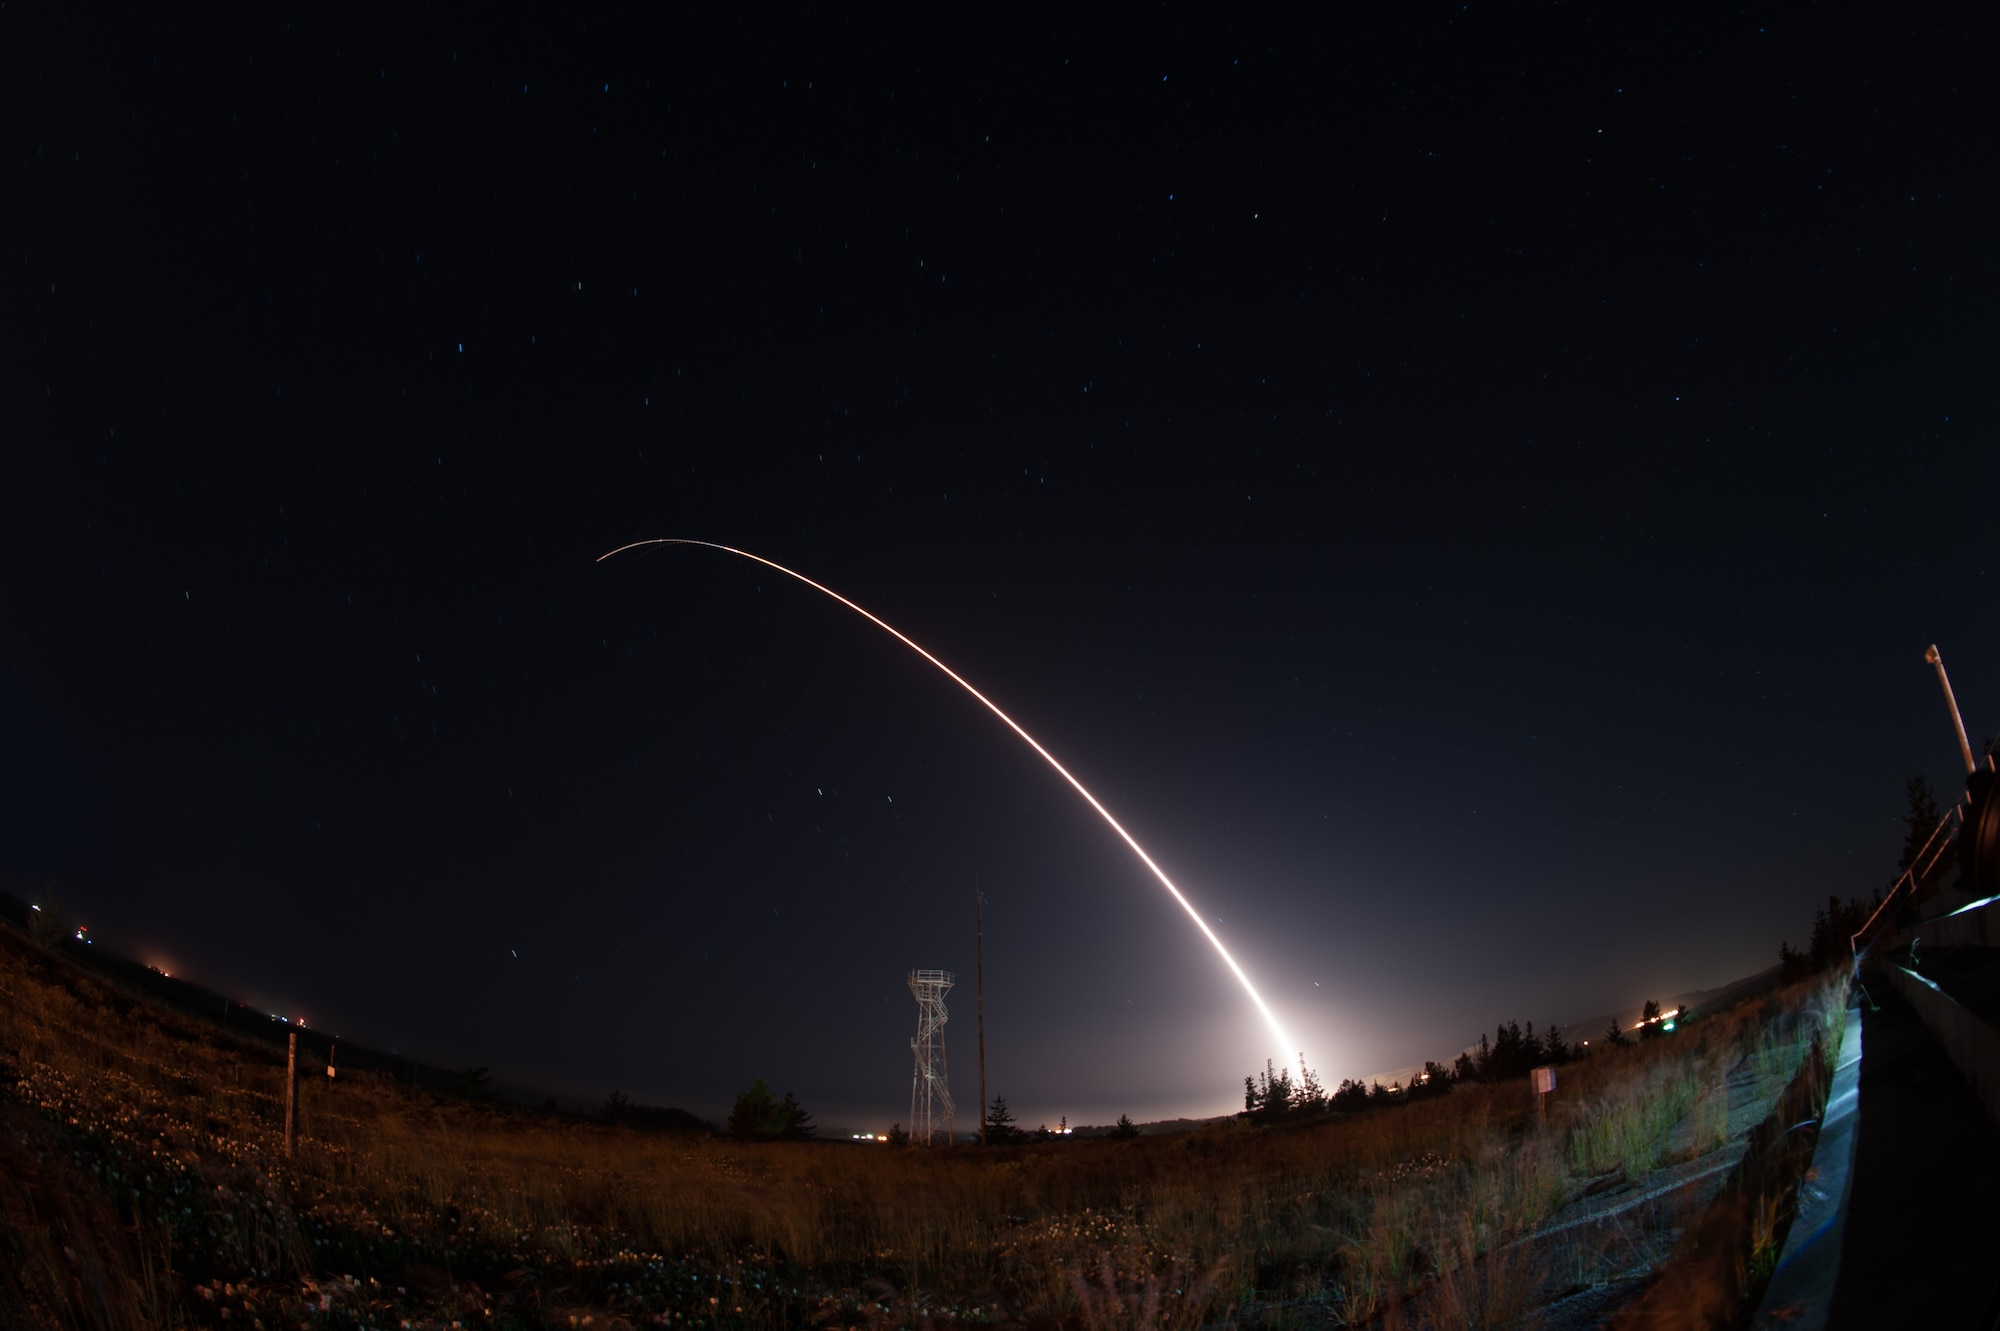 An unarmed Minuteman III intercontinental ballistic missile launches during an operational test at 12:03 a.m., PDT, April 26, from Vandenberg Air Force Base, Calif. The Minuteman system has been in service for 60 years. (U.S. Air Force photo by Michael Peterson)